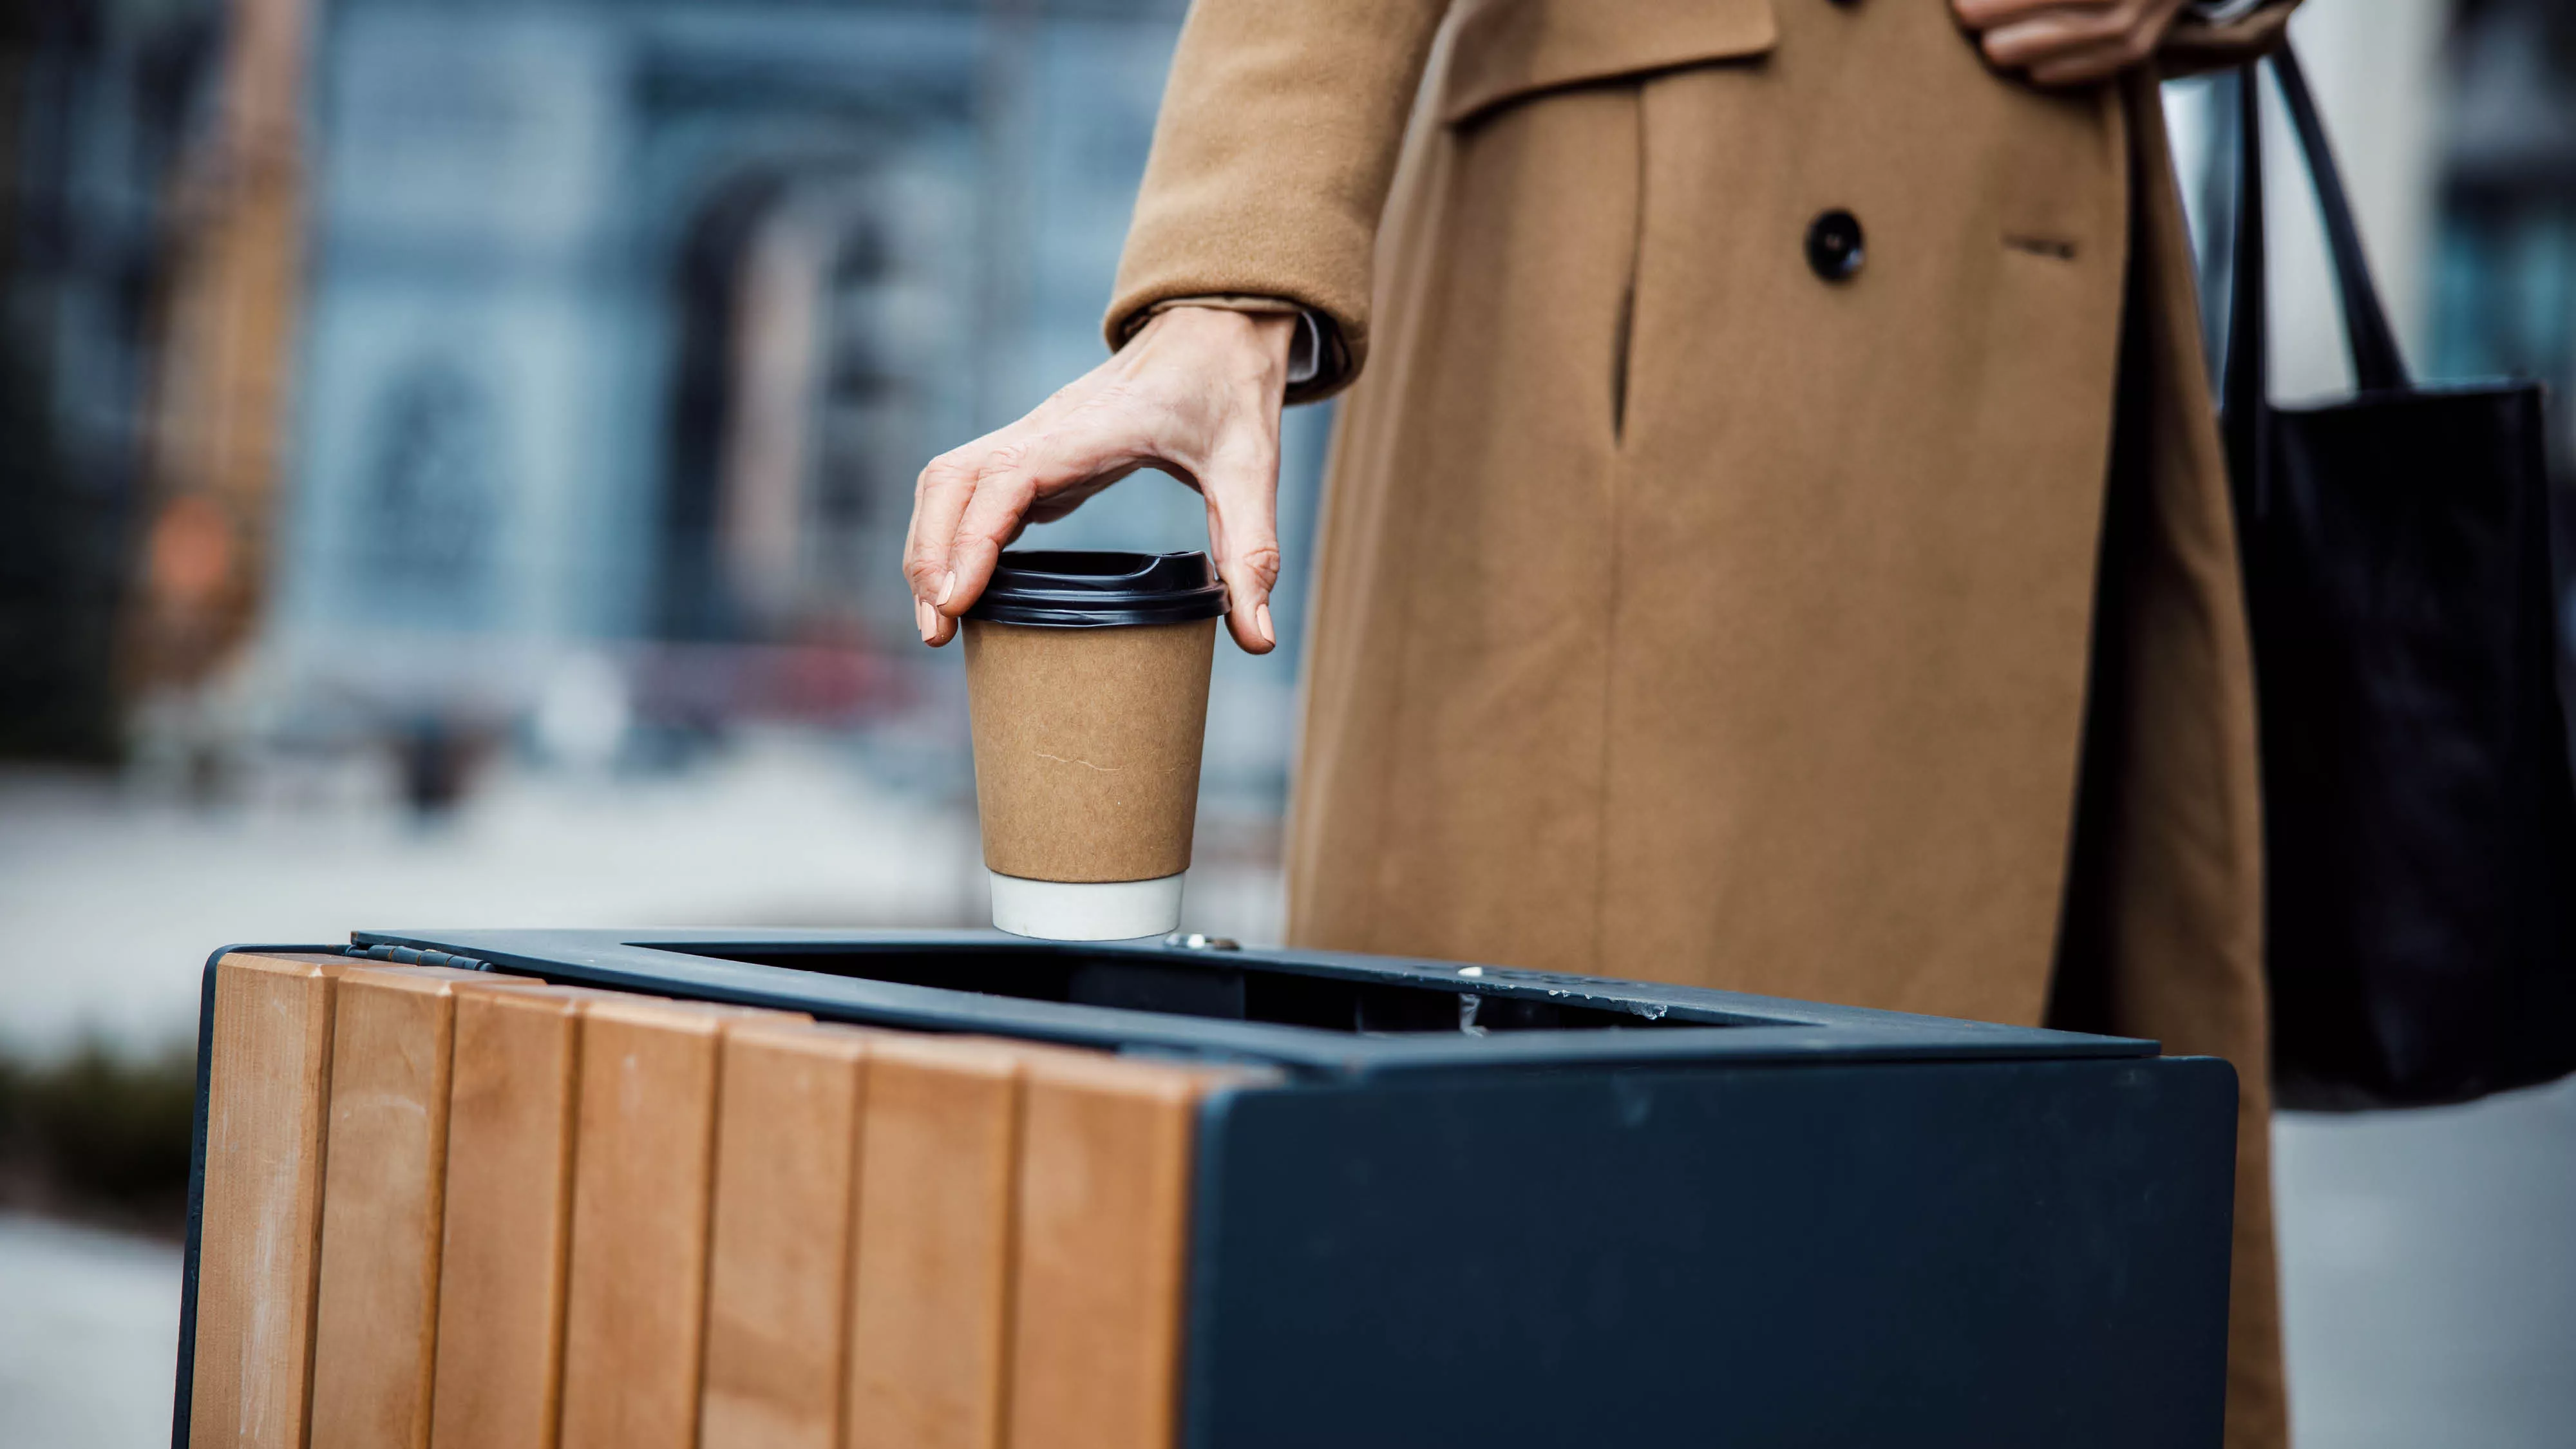 A person placing a coffee cup in the garbage bin